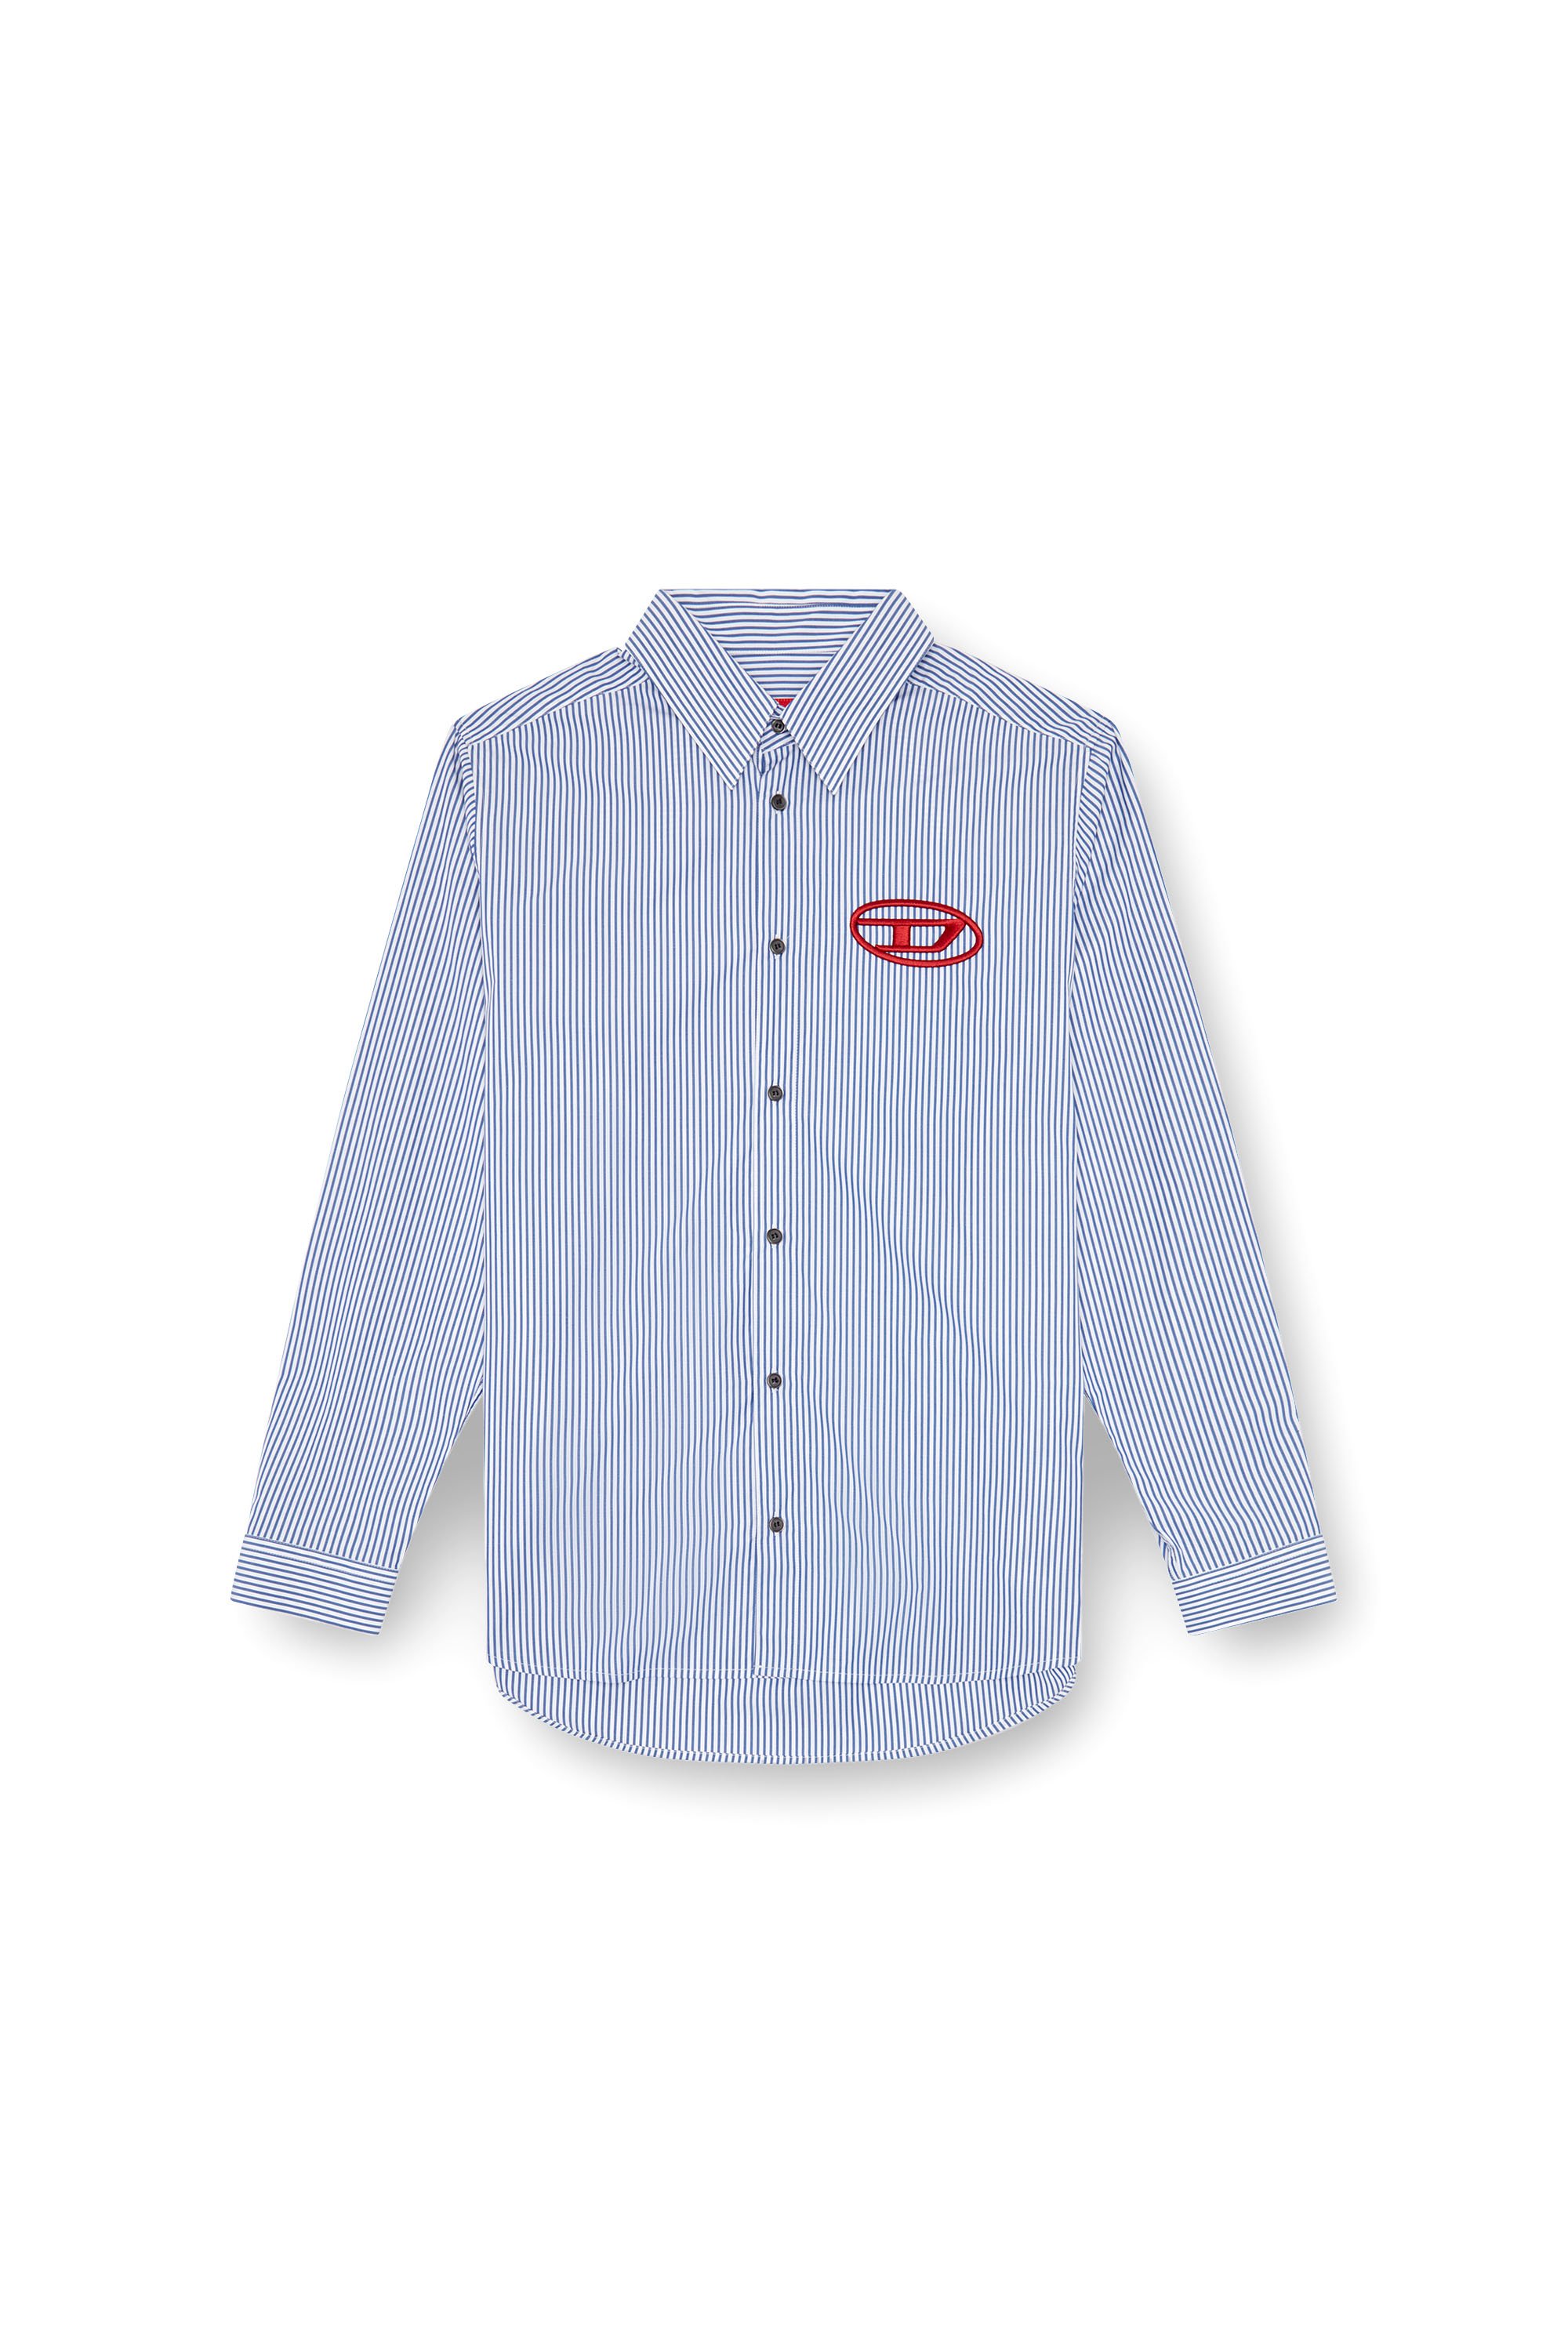 Diesel - S-SIMPLY-E, Man Striped shirt with Oval D embroidery in Blue - Image 3